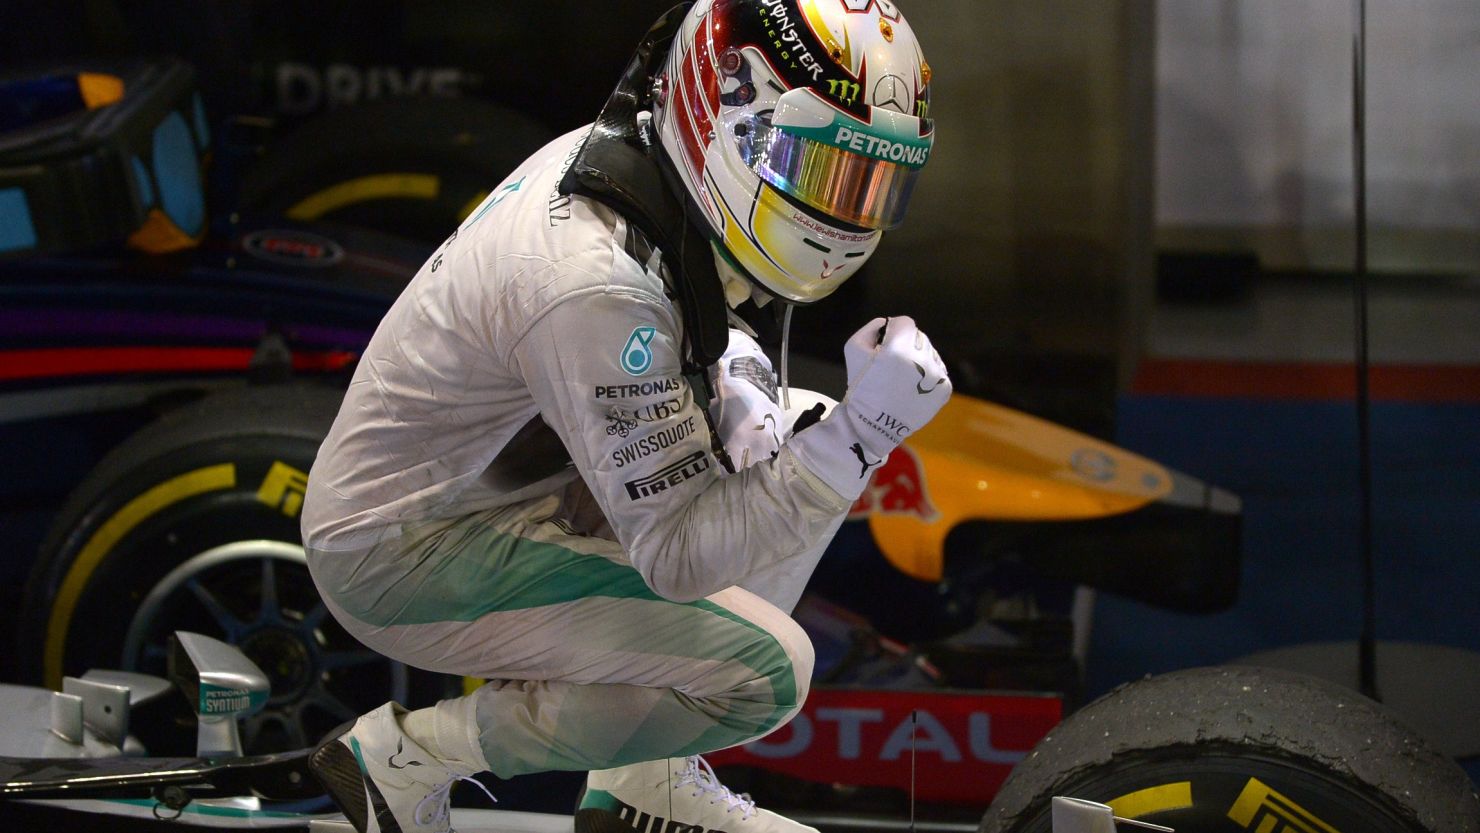 Lewis Hamilton poses on top of his car after winning the Singapore GP to take the title lead.